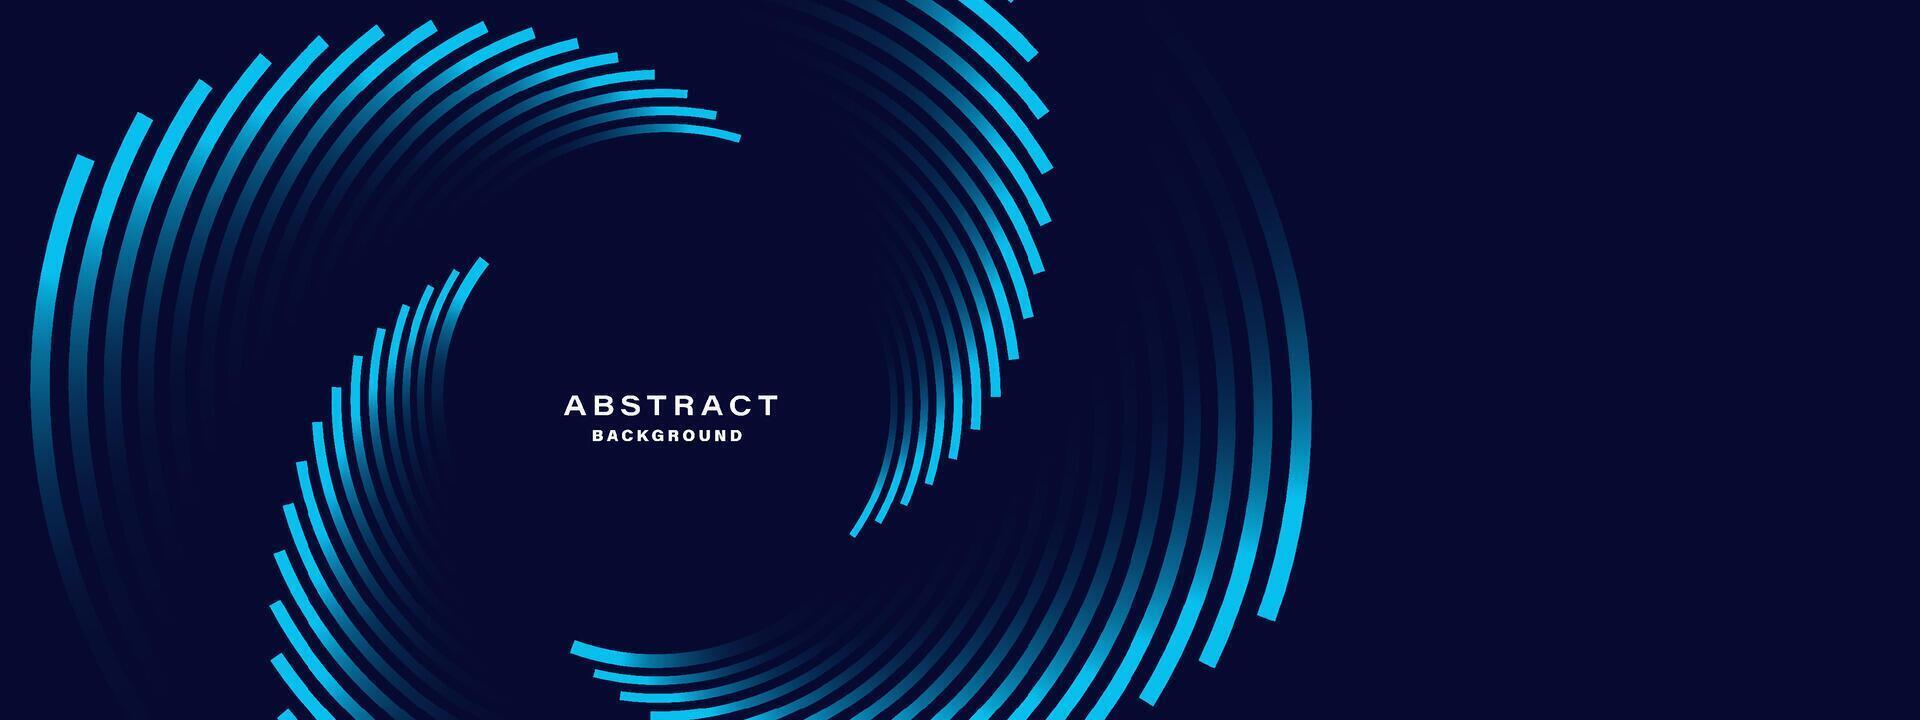 Blue abstract background with spiral circle lines, vector